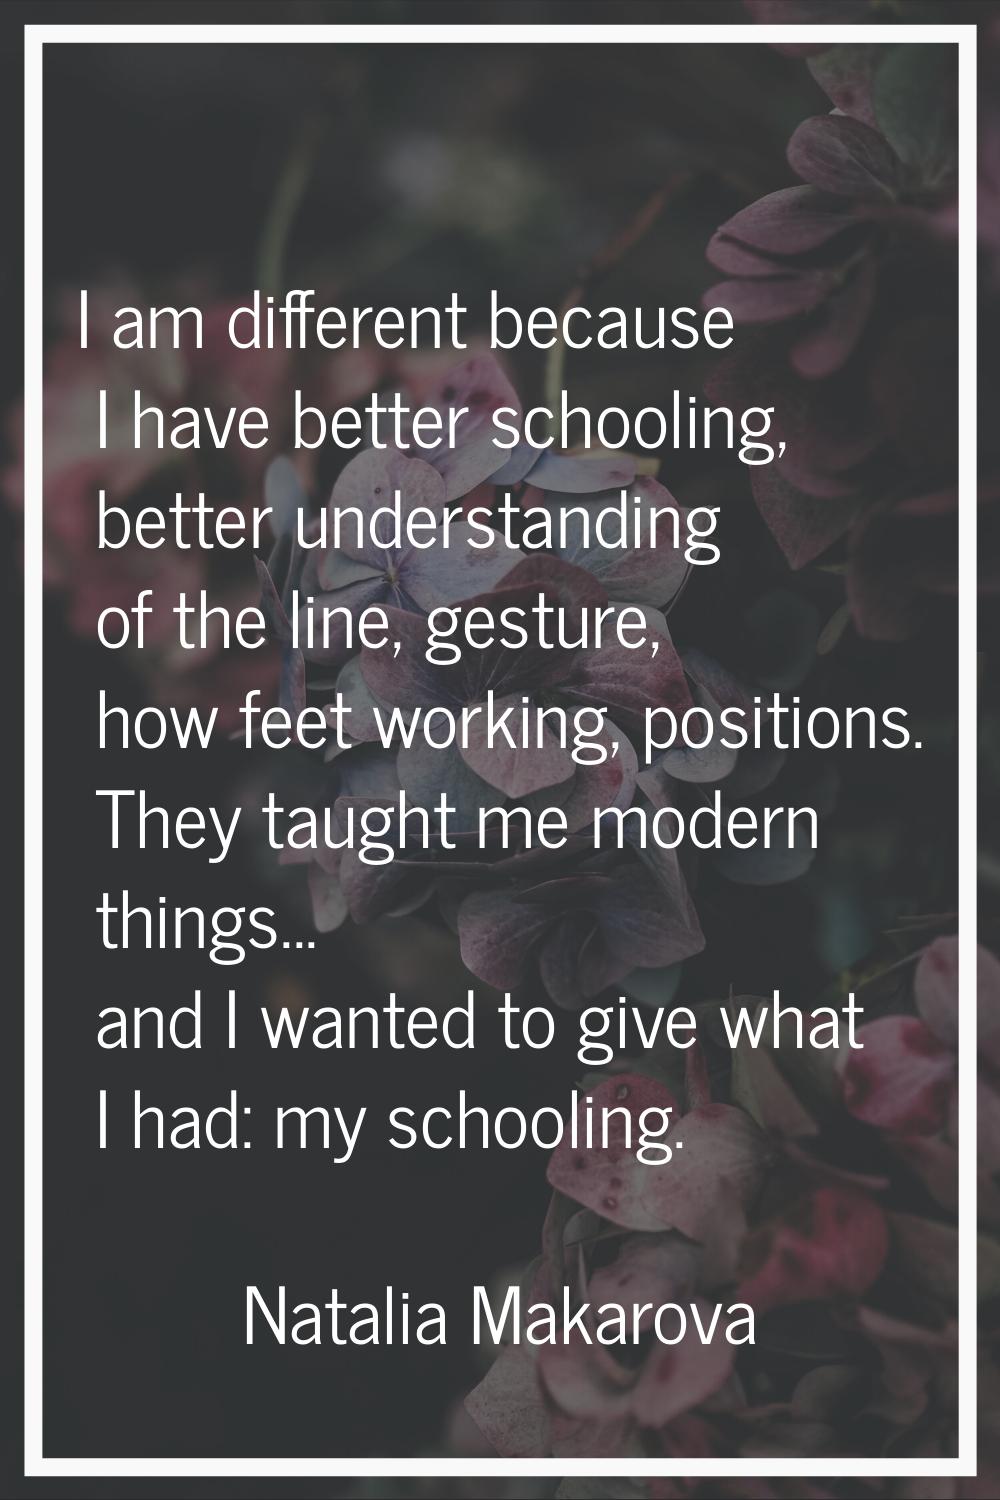 I am different because I have better schooling, better understanding of the line, gesture, how feet